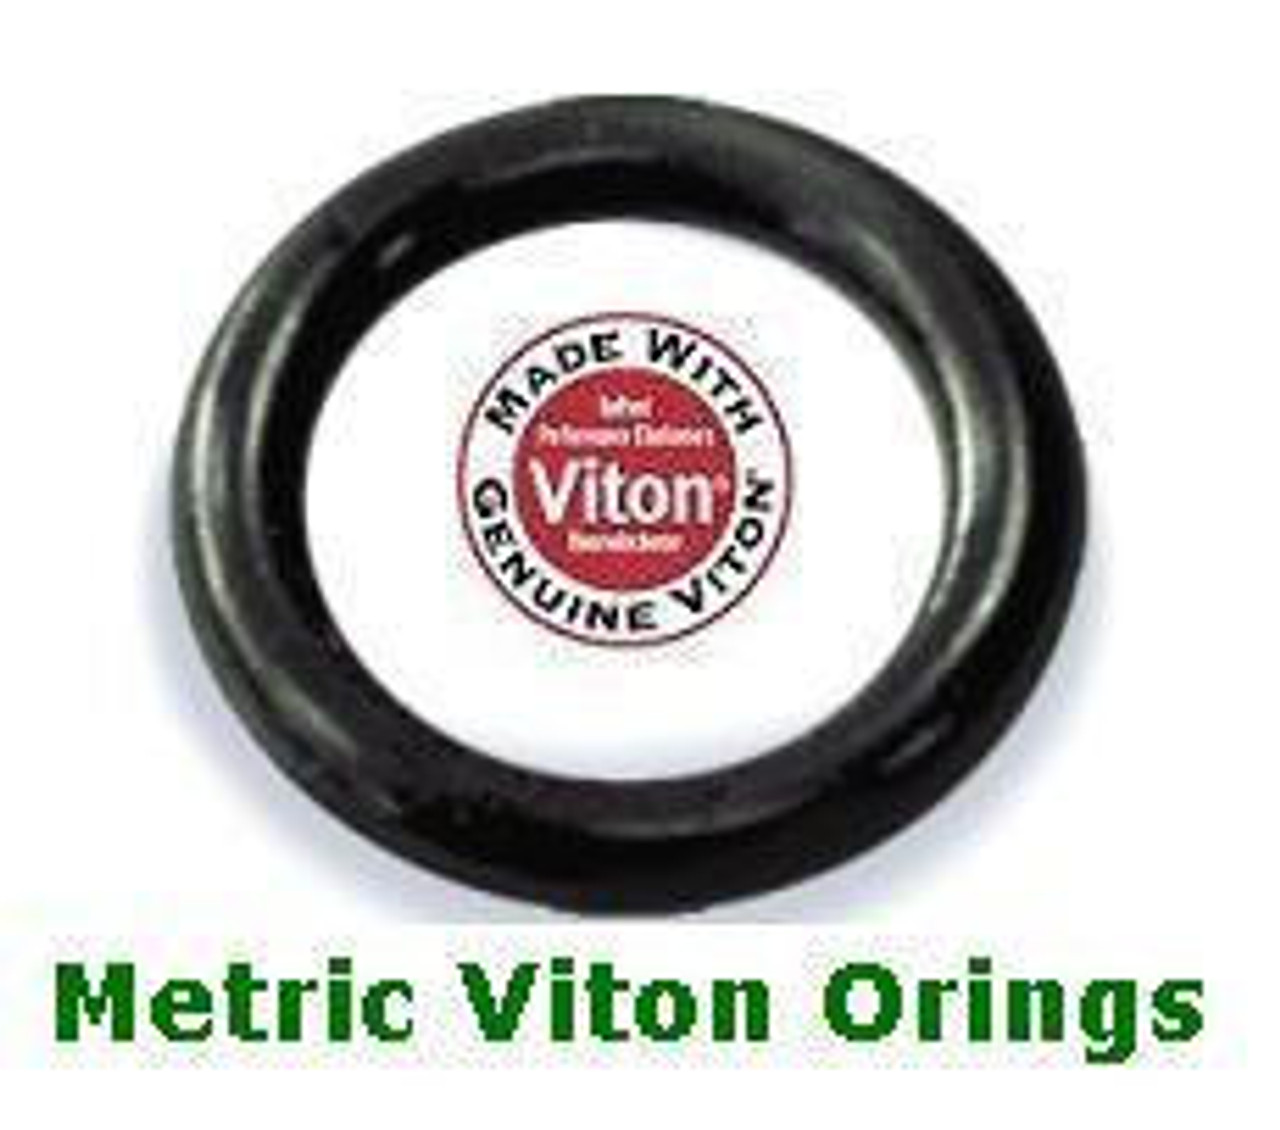 FKM O-ring 80 x 3mm Price for 1 pc